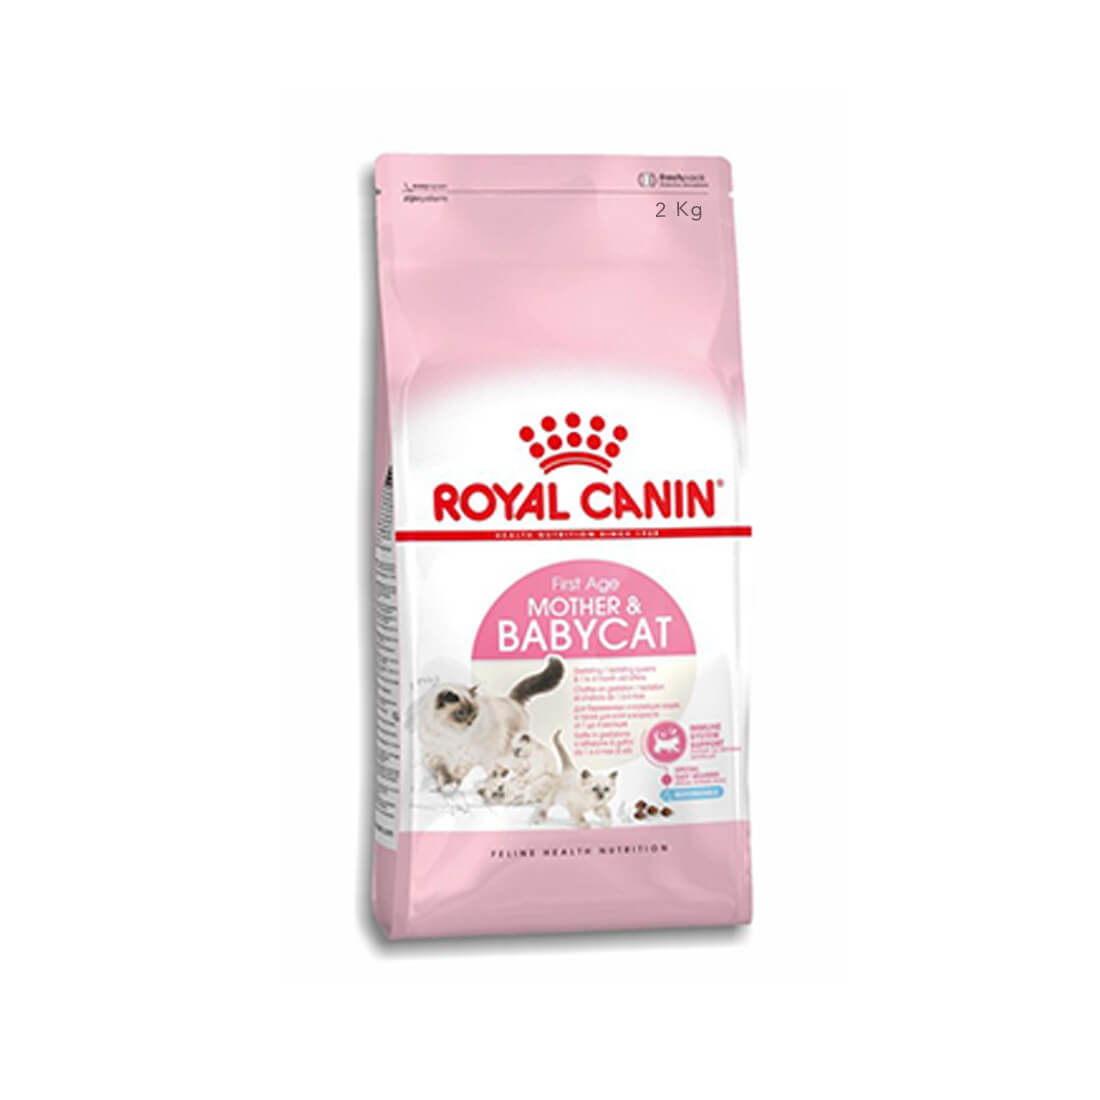 royal canin mother and baby cat 400+400